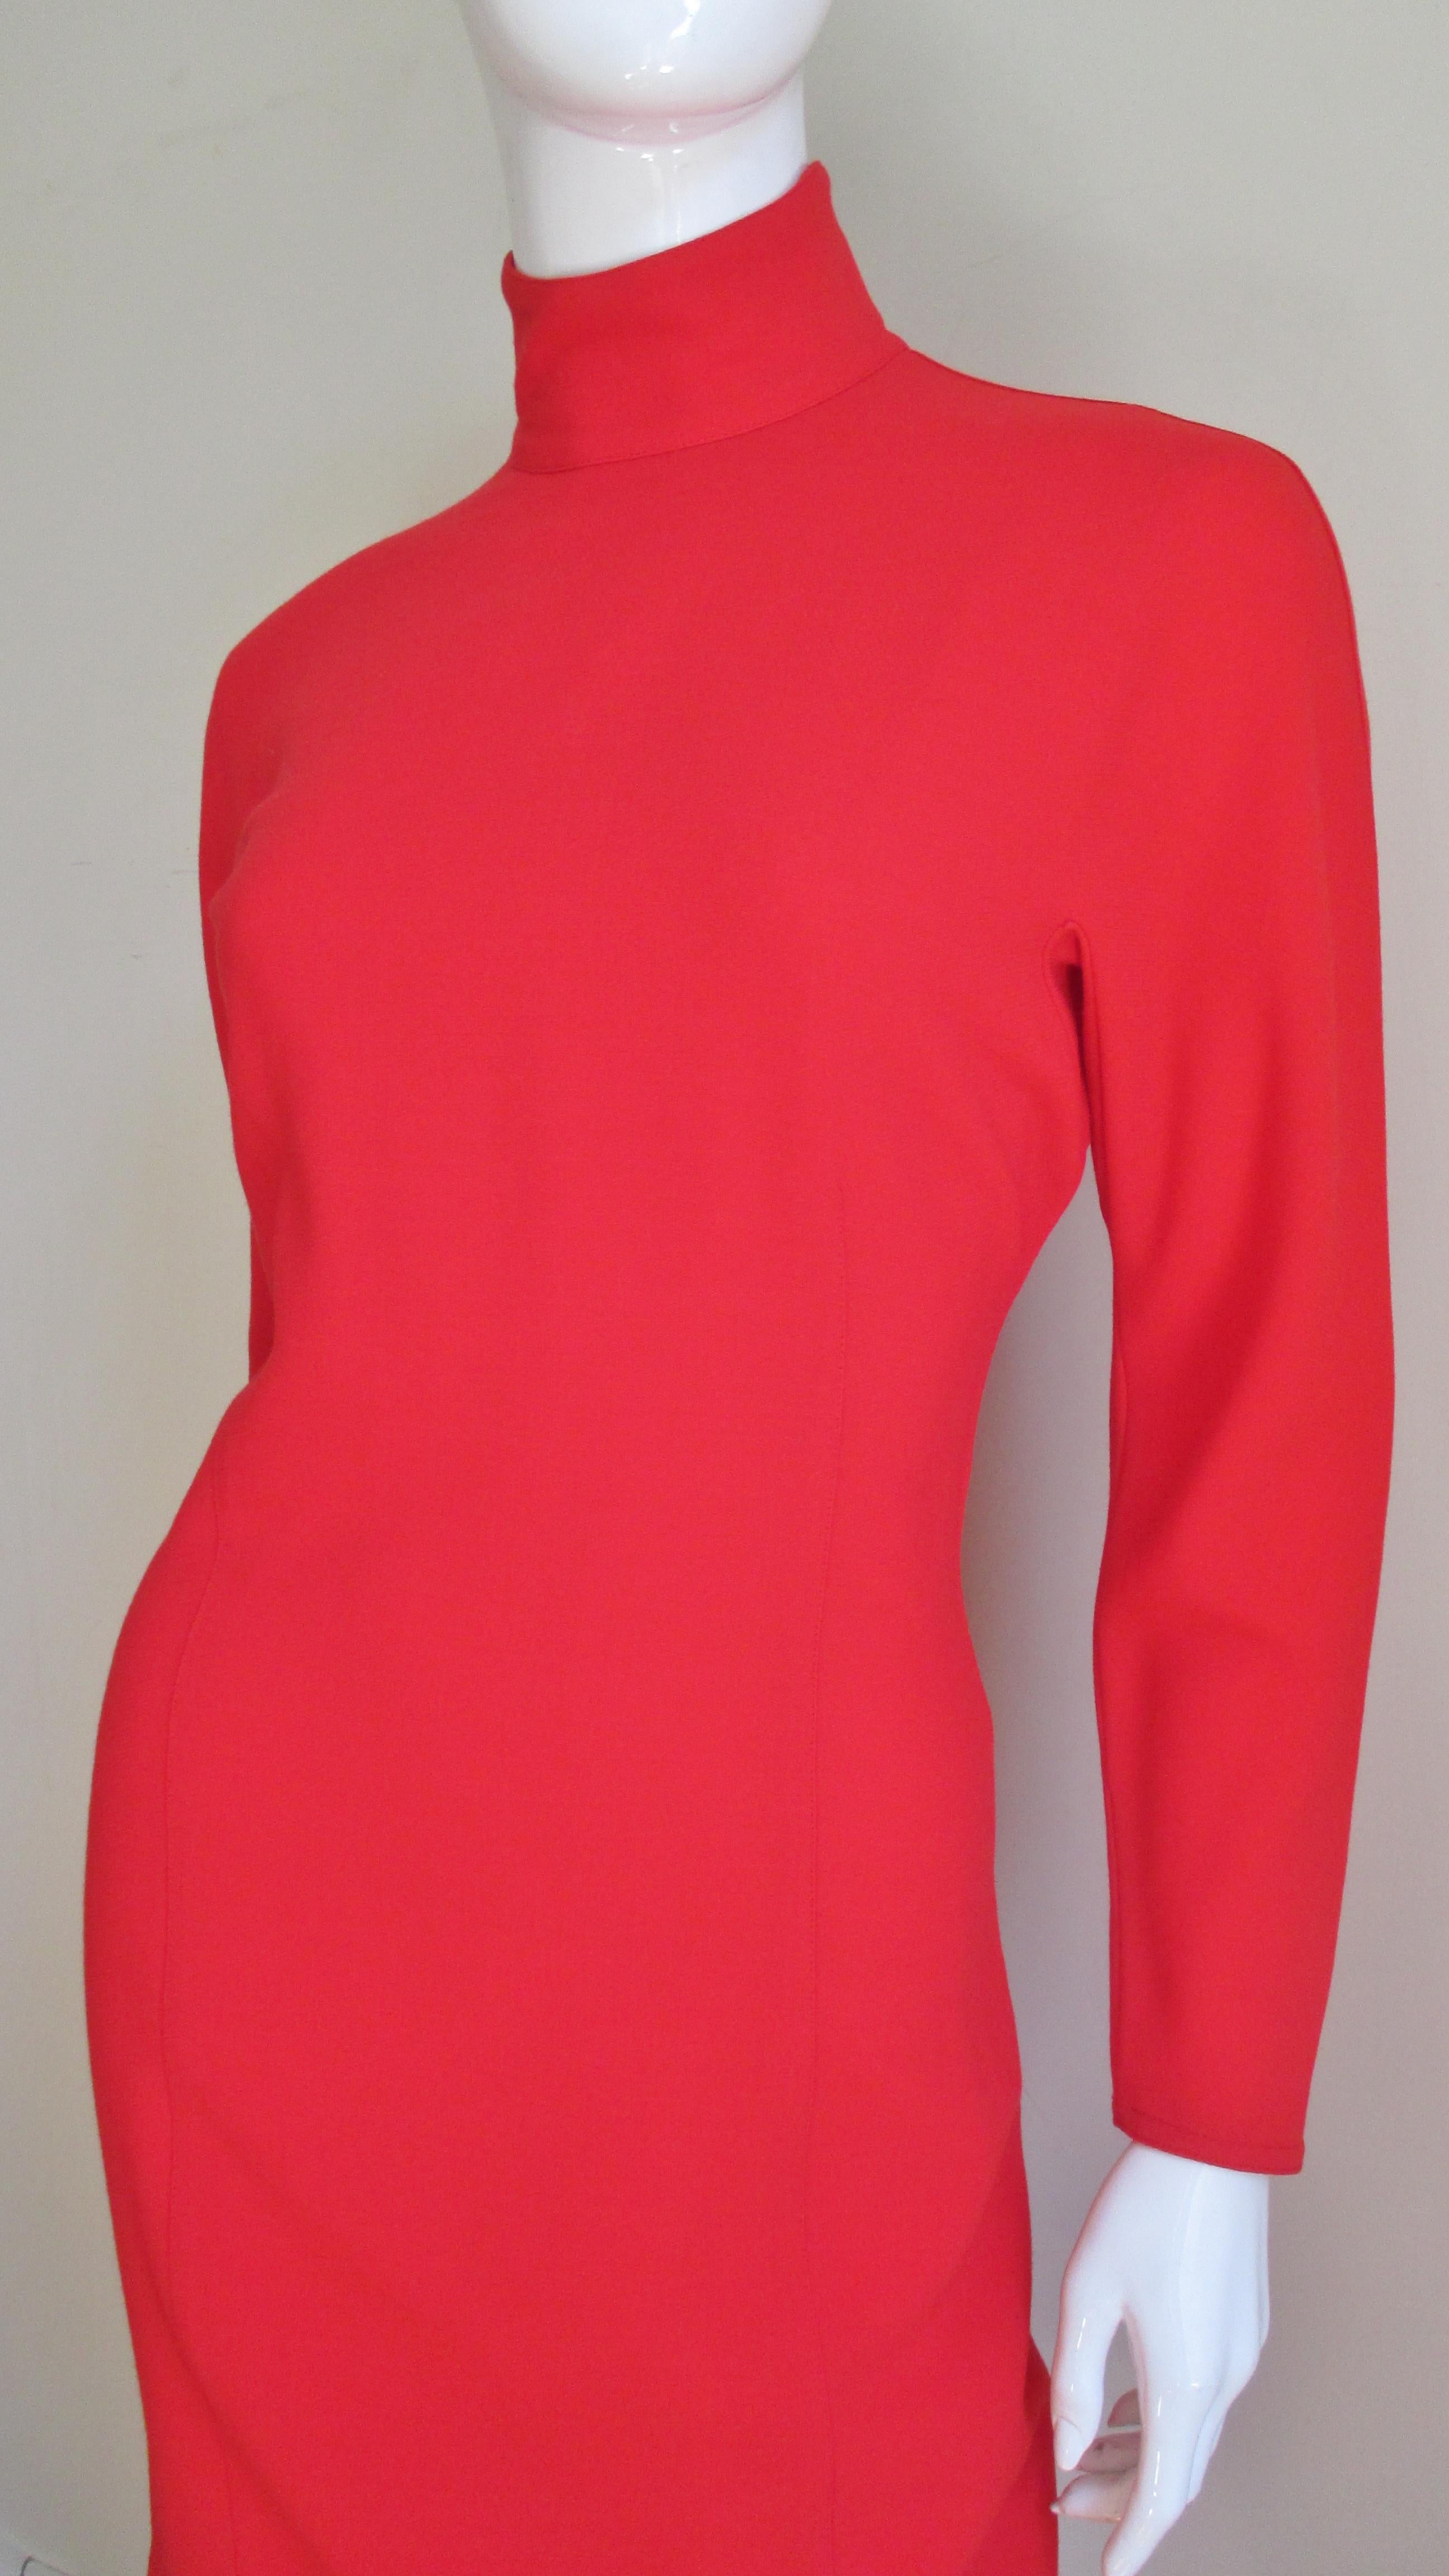 Red Gianni Versace Orange Dress with Layered Hem 1990s For Sale